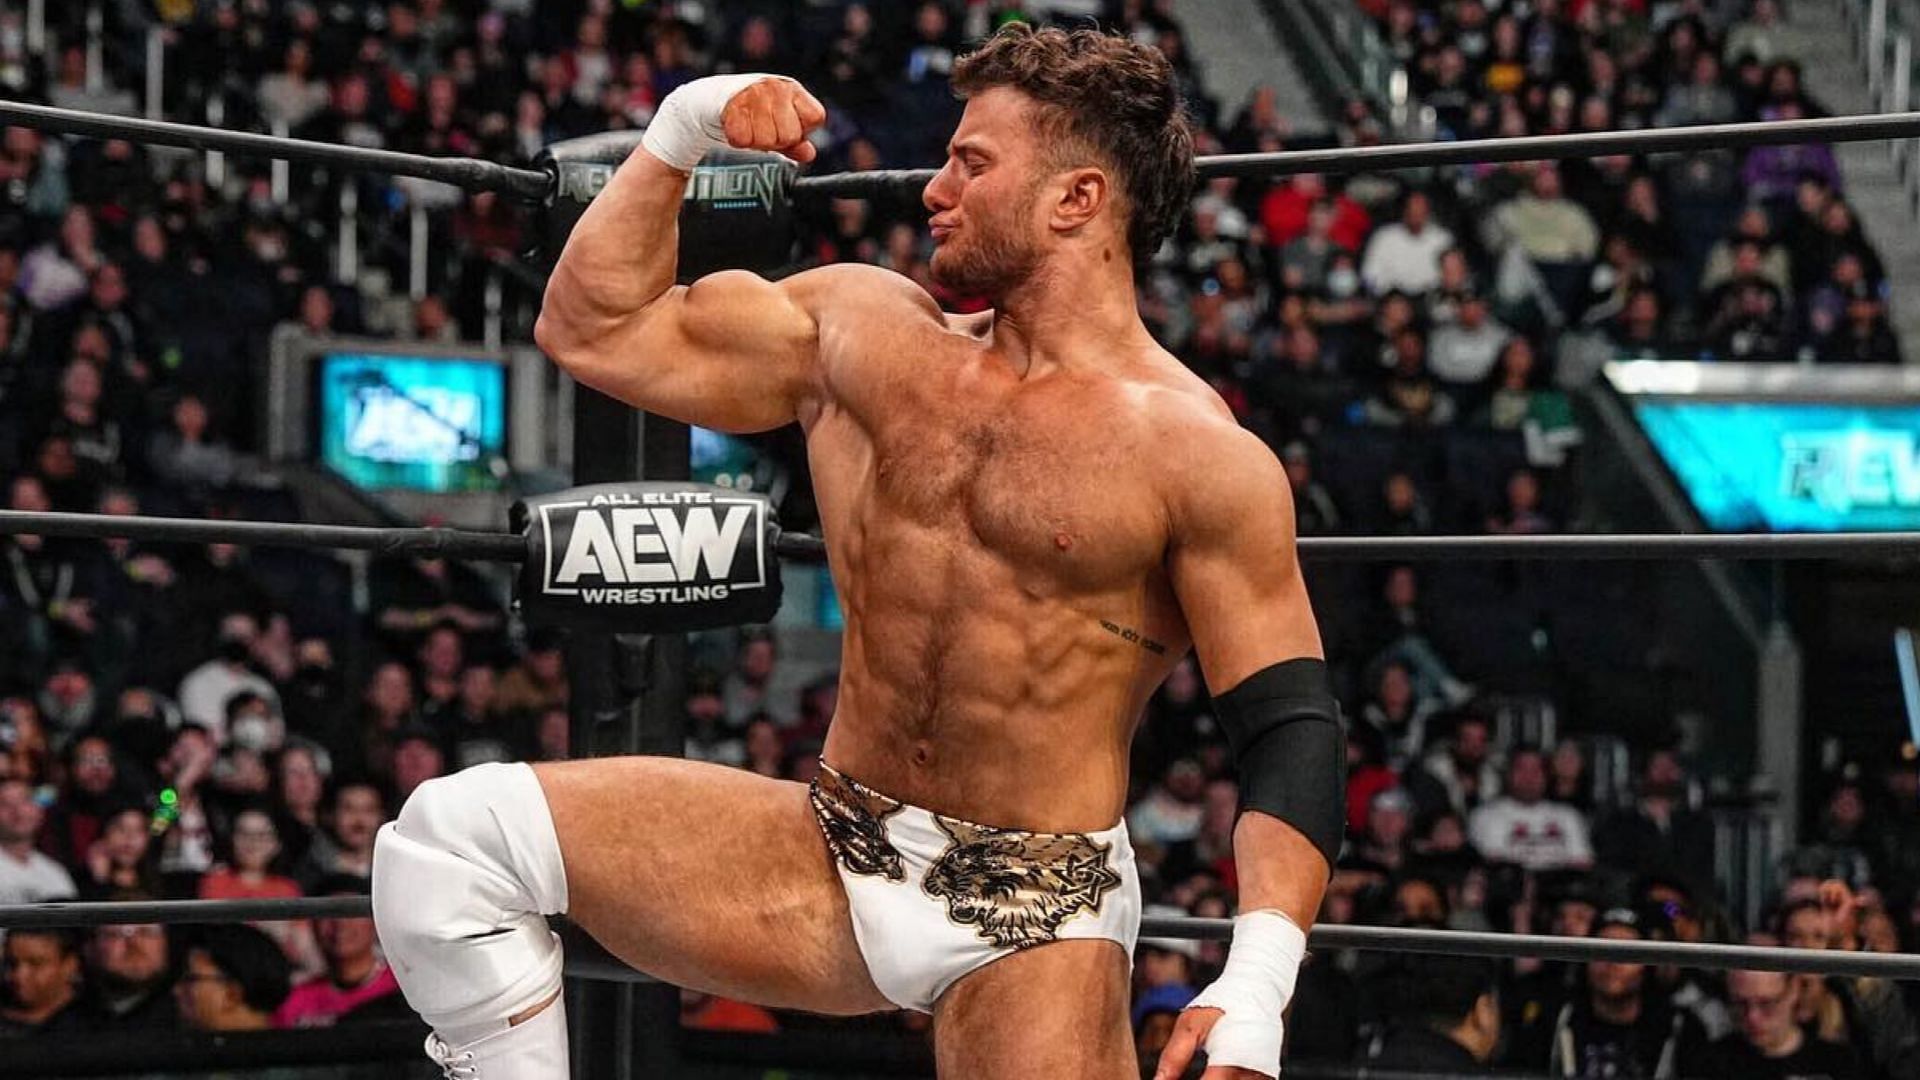 MJF poses for his opponent and the fans inside the AEW ring